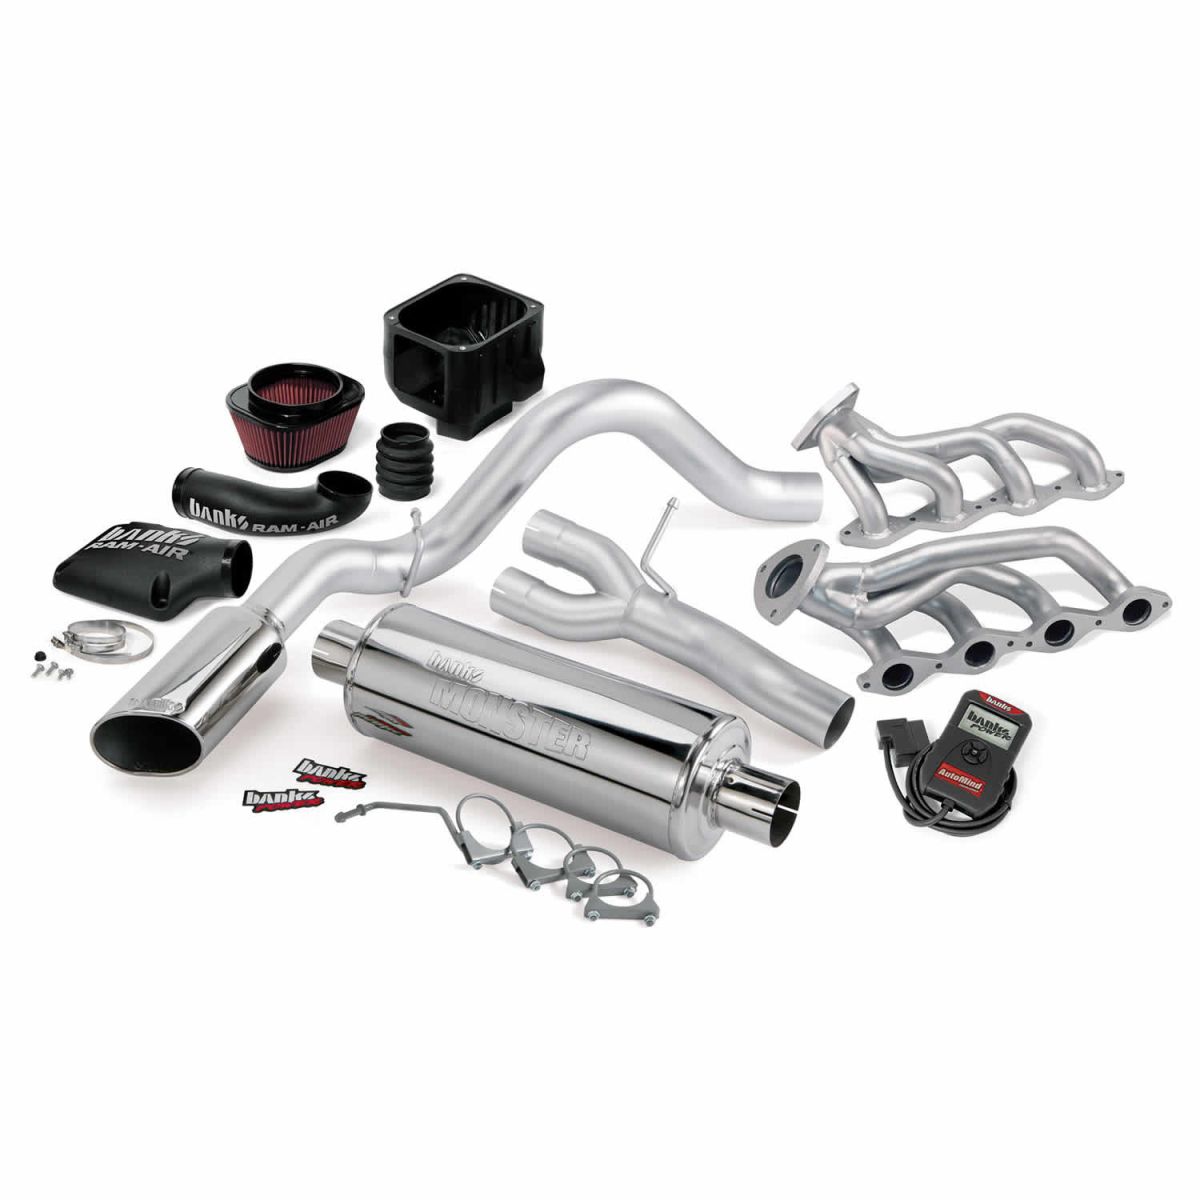 Banks Power - Banks Power PowerPack Bundle Complete Power System W/AutoMind Programmer Chrome Tailpipe 02-06 Chevy 4.8-5.3L 1500 SCSB